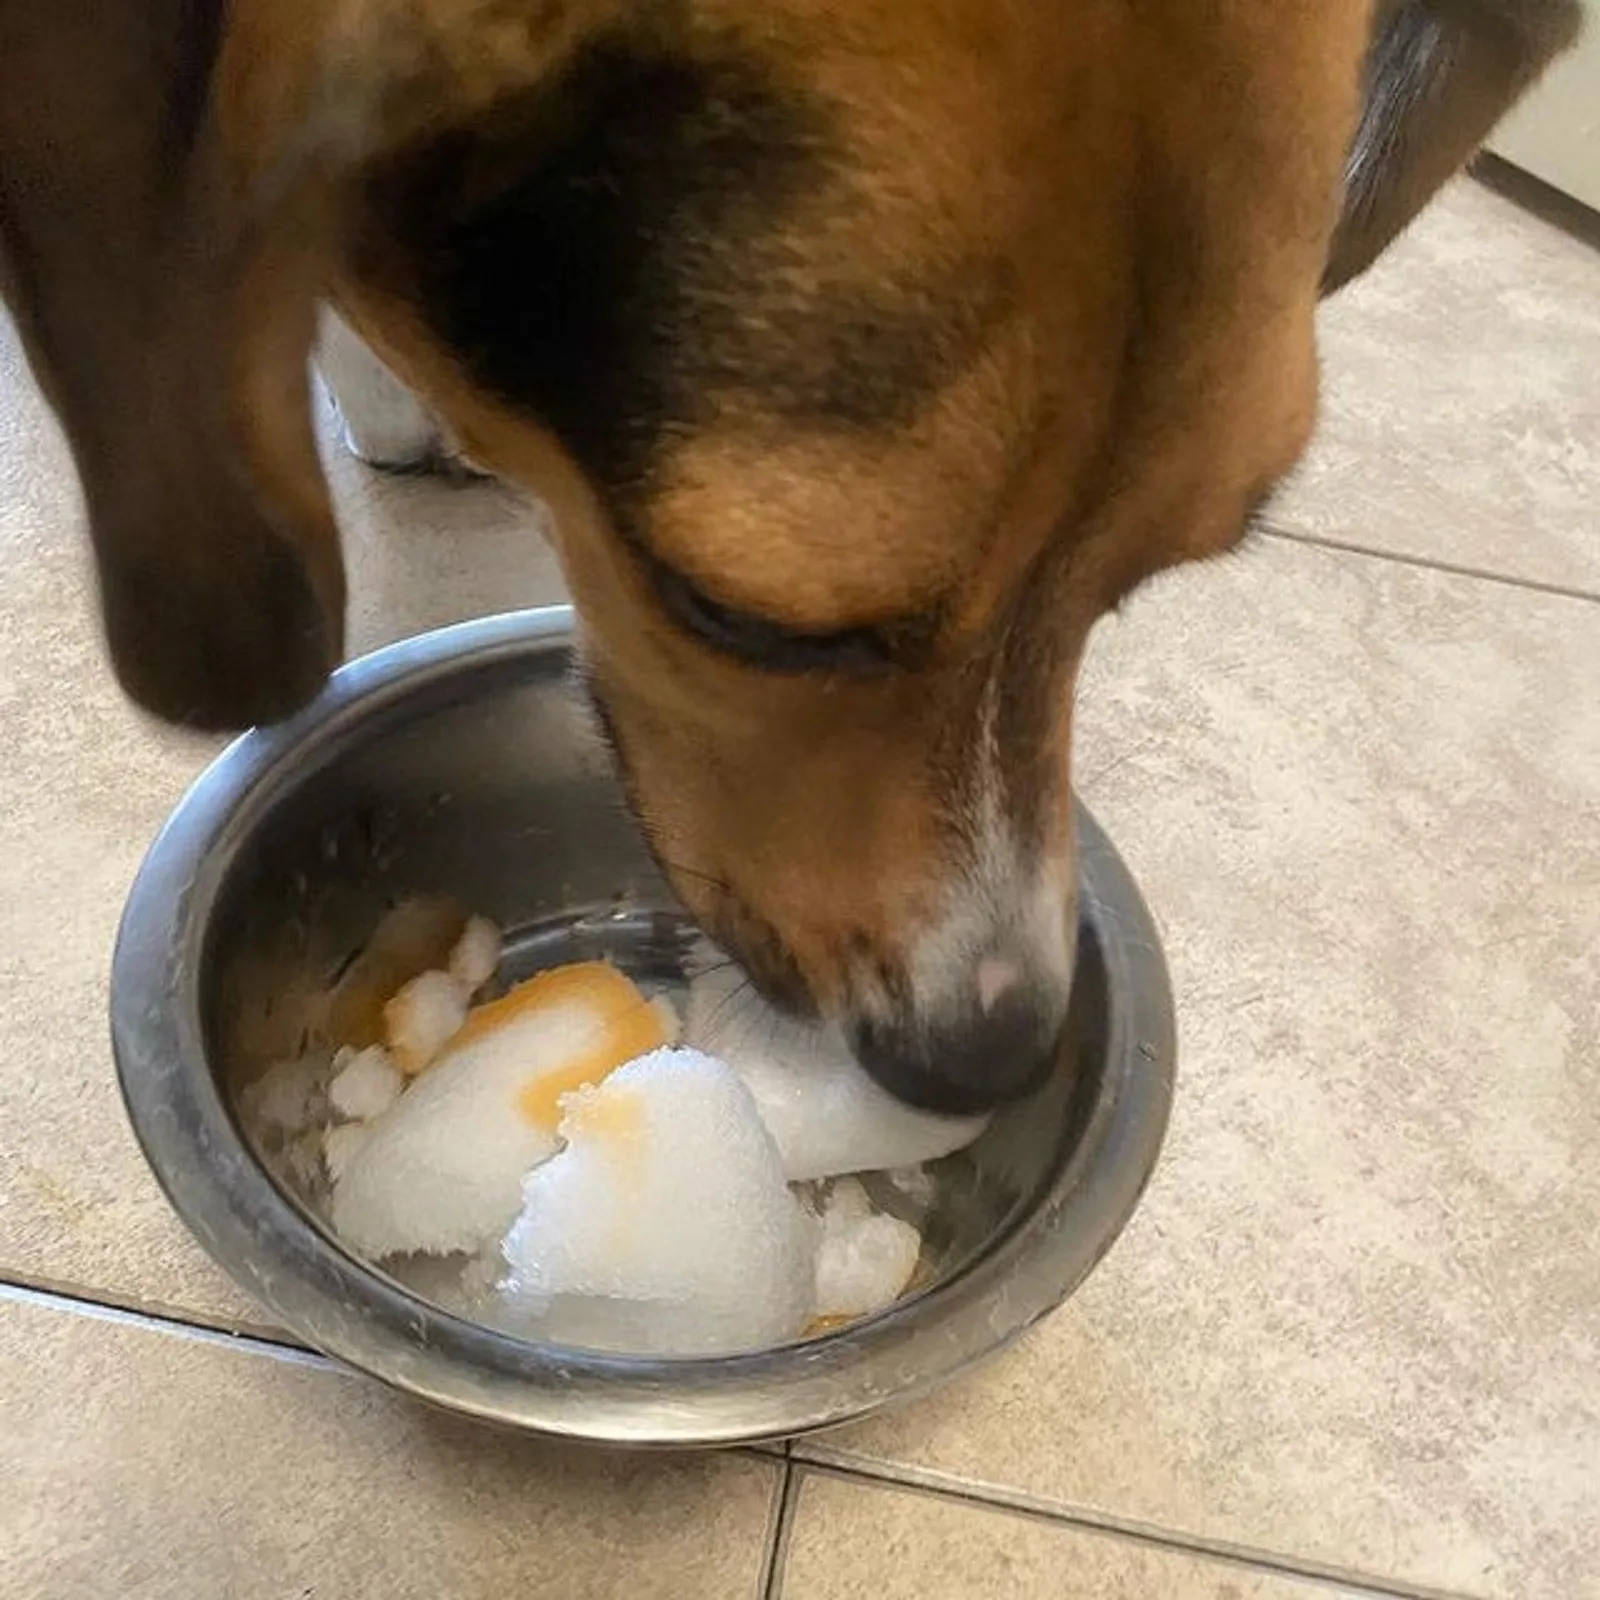 treeing walker coonhound beagle eating from a bowl